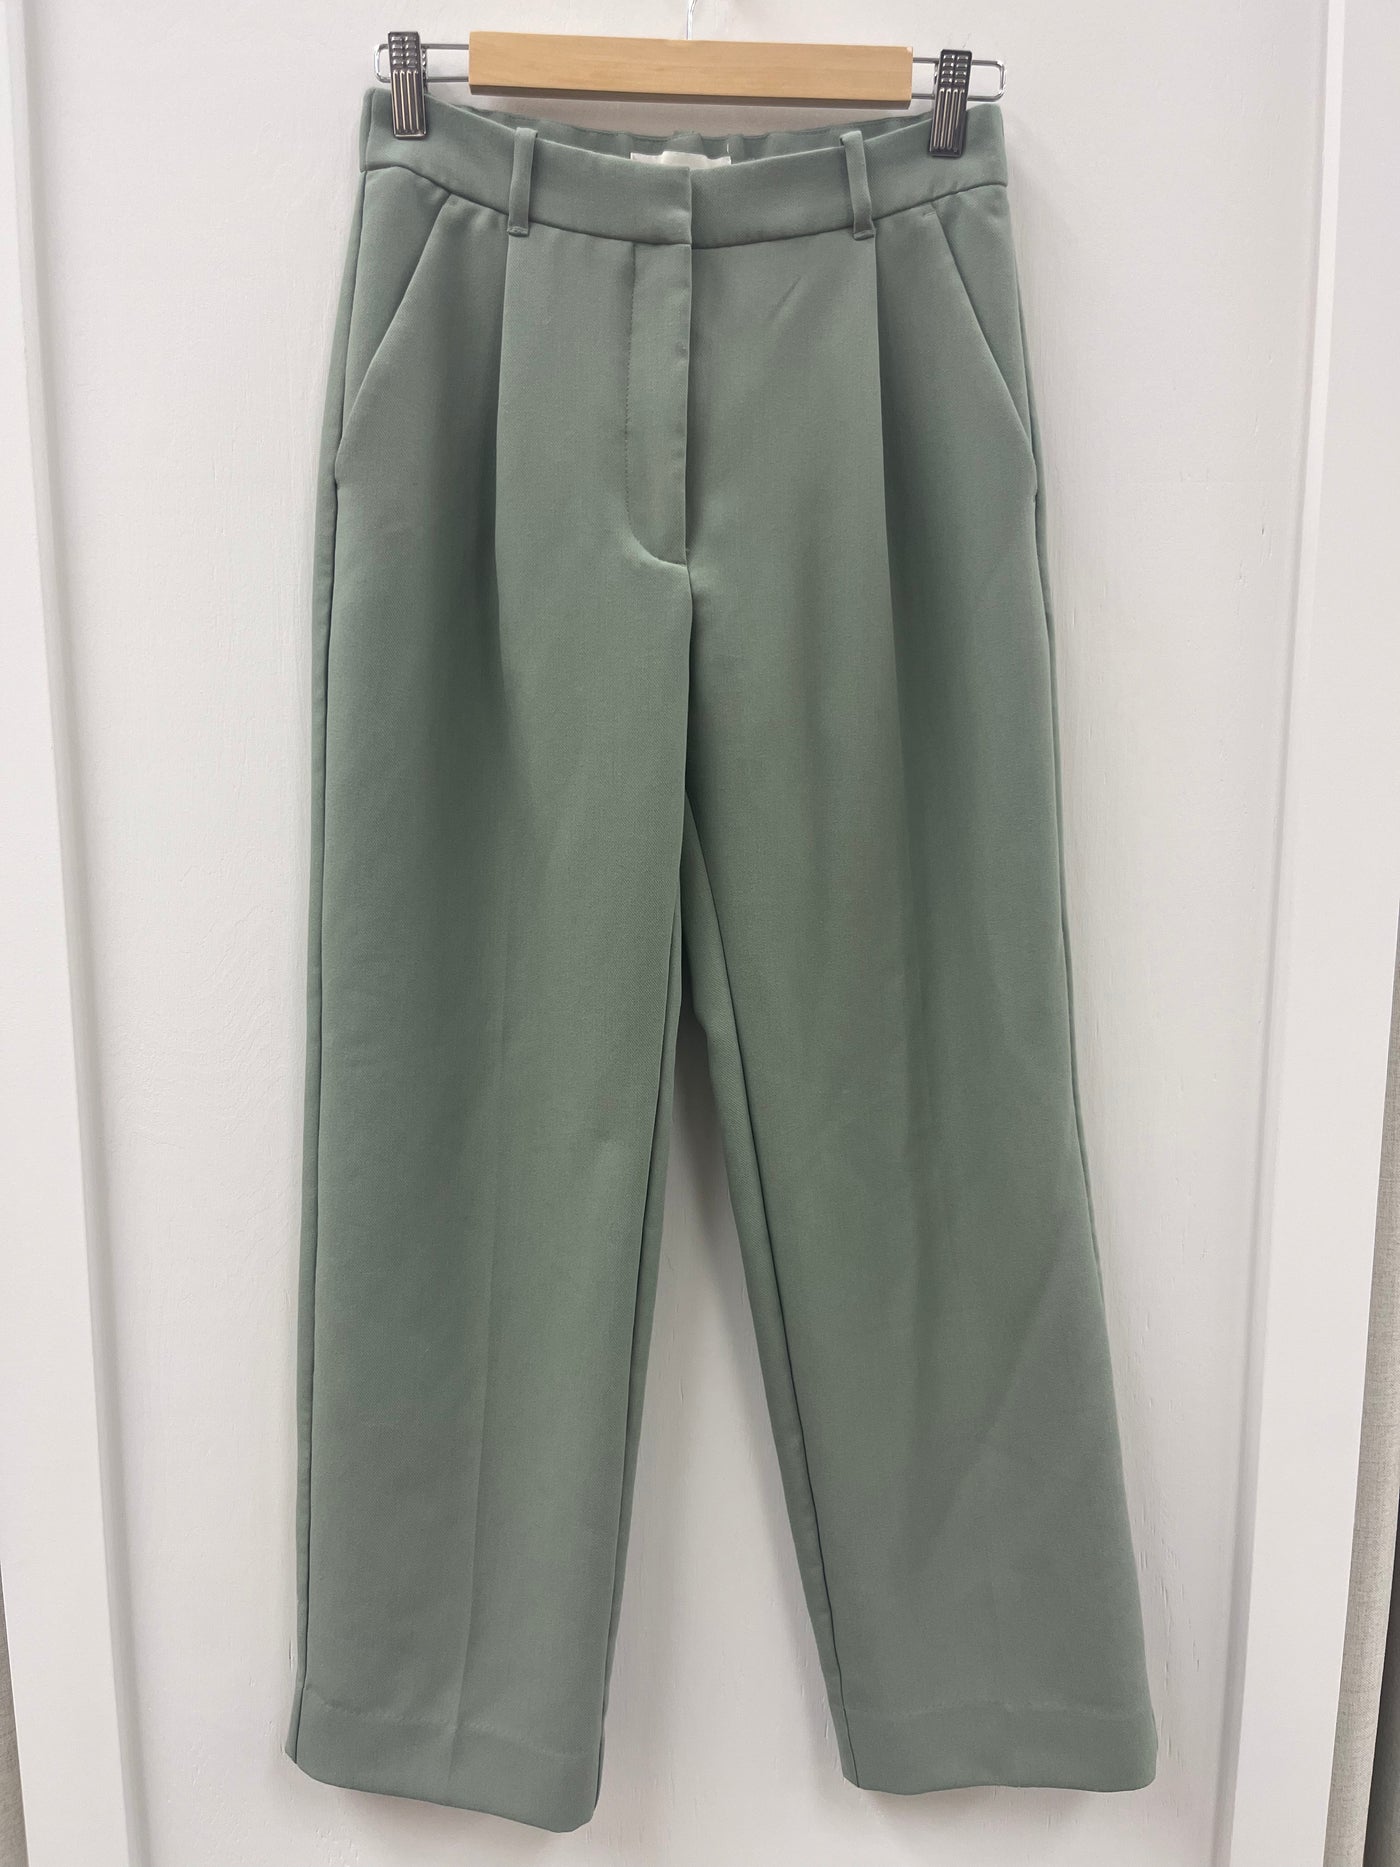 ABERCROMBIE & FITCH olive pants